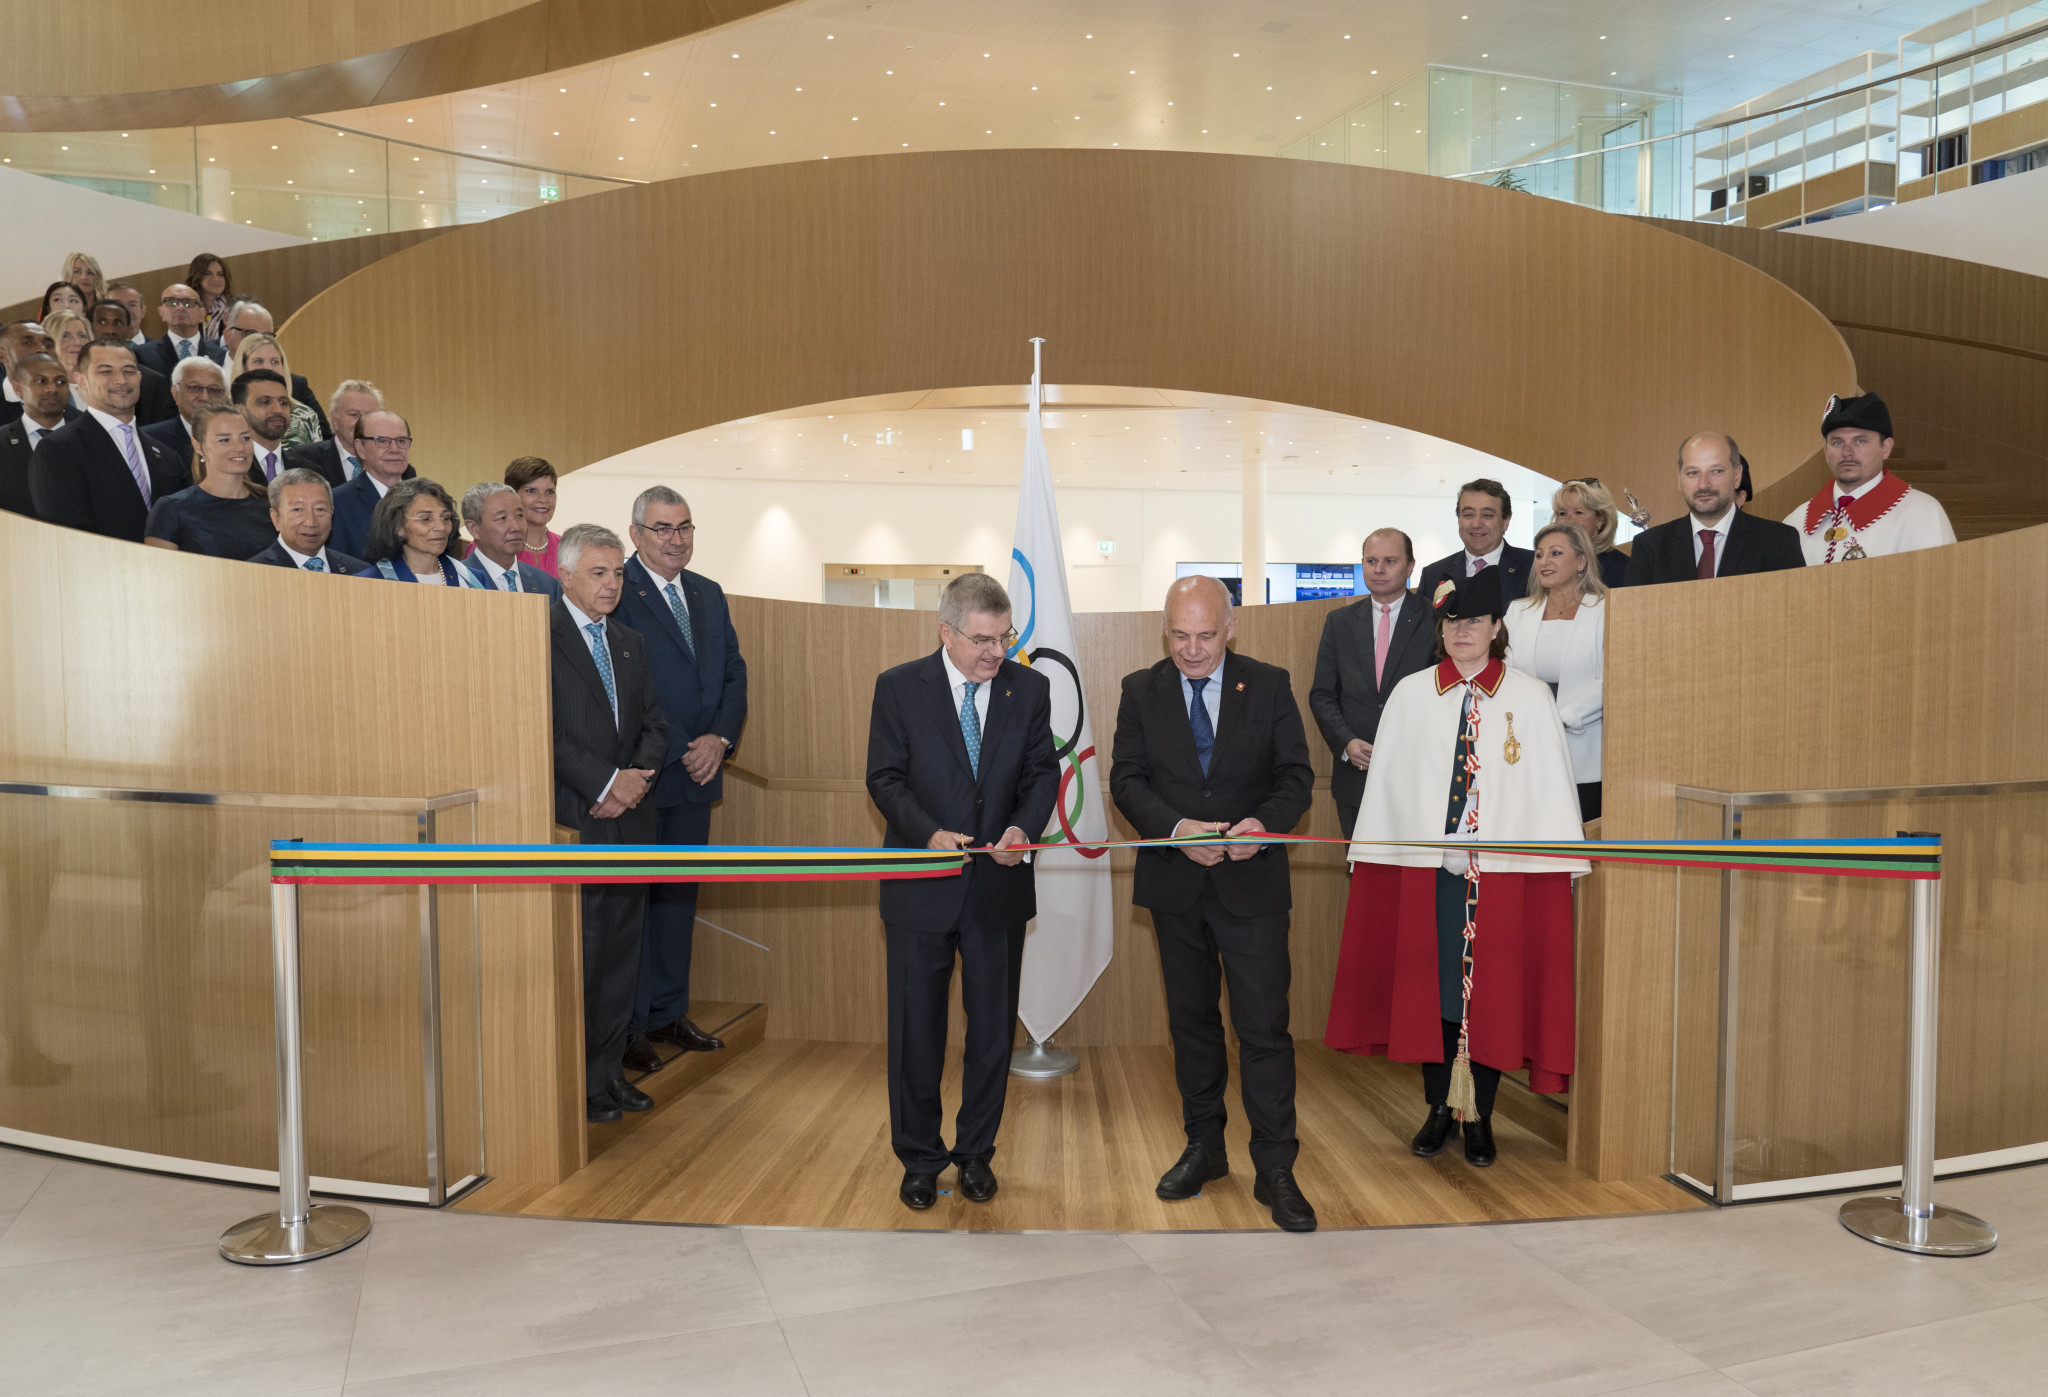 Olympic House was opened in Lausanne on Sunday by IOC President Thomas Bach and Swiss President Ueli Maurer at a special ceremony attended by guests from across the world ©IOC